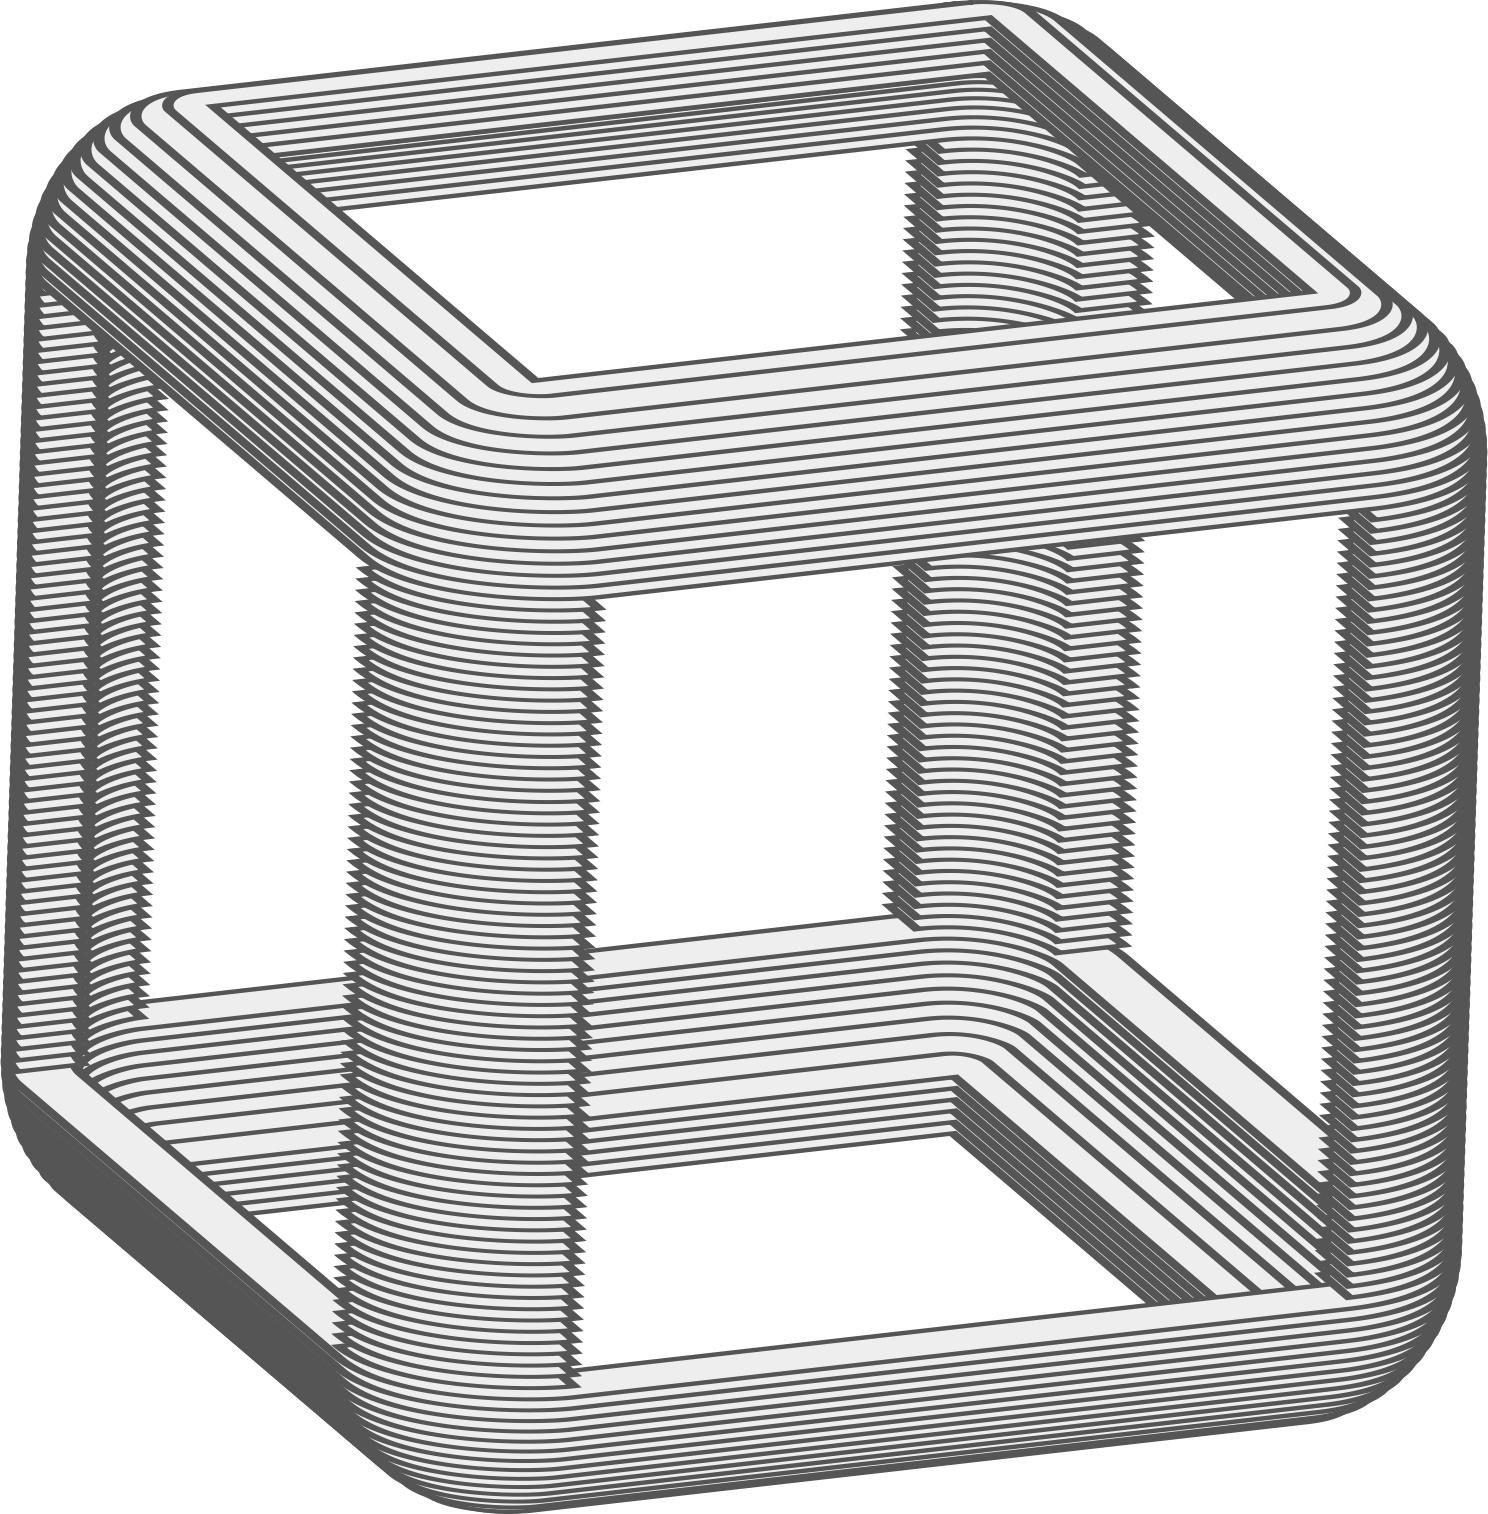 Hollow big image png. Cube clipart animated